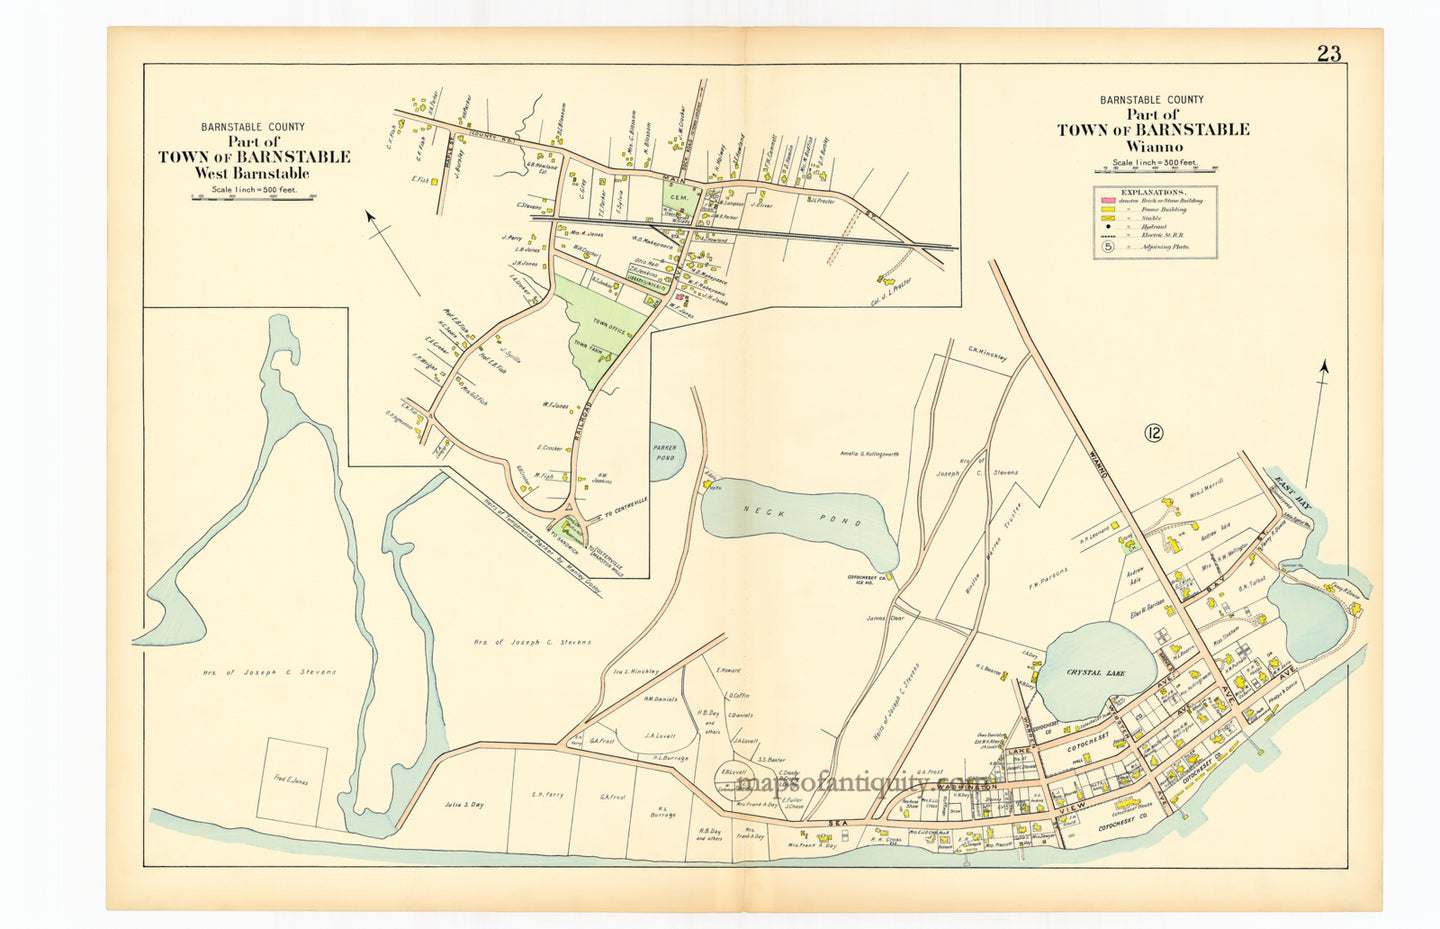 Reproduction-West-Barnstable-Wianno-p.-23.---Town-and-Village-Maps-Atlas-of-Barnstable-County-Walker-1906.----Reproduction---Reproductions-Cape-Cod-and-Islands-Reproduction--Maps-Of-Antiquity